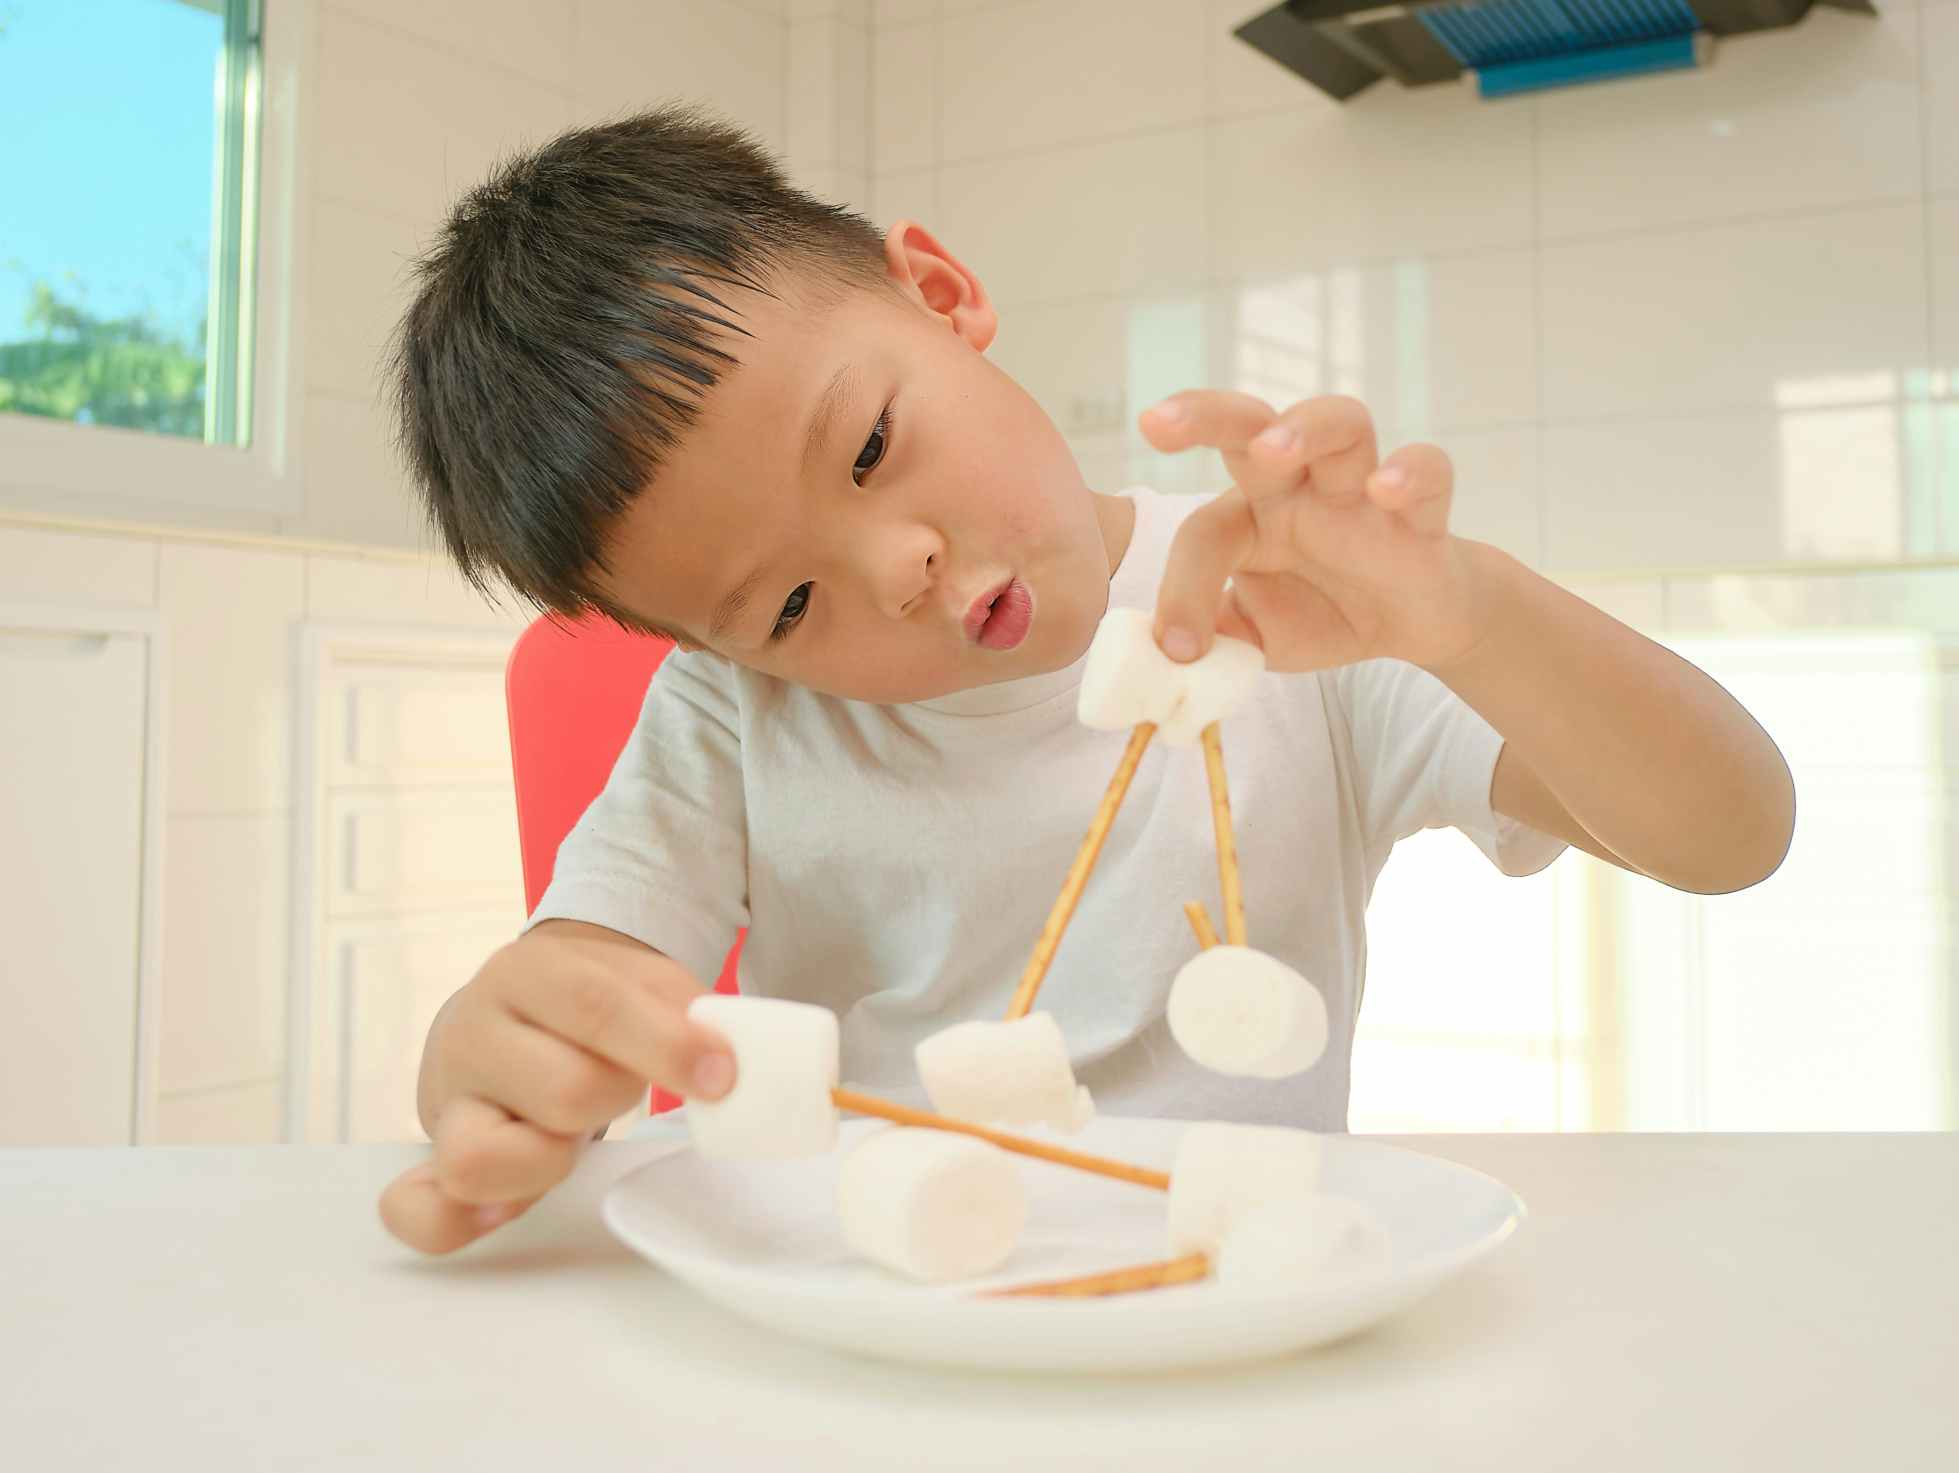 A little boy connecting marshmallows with sticks on a plate.